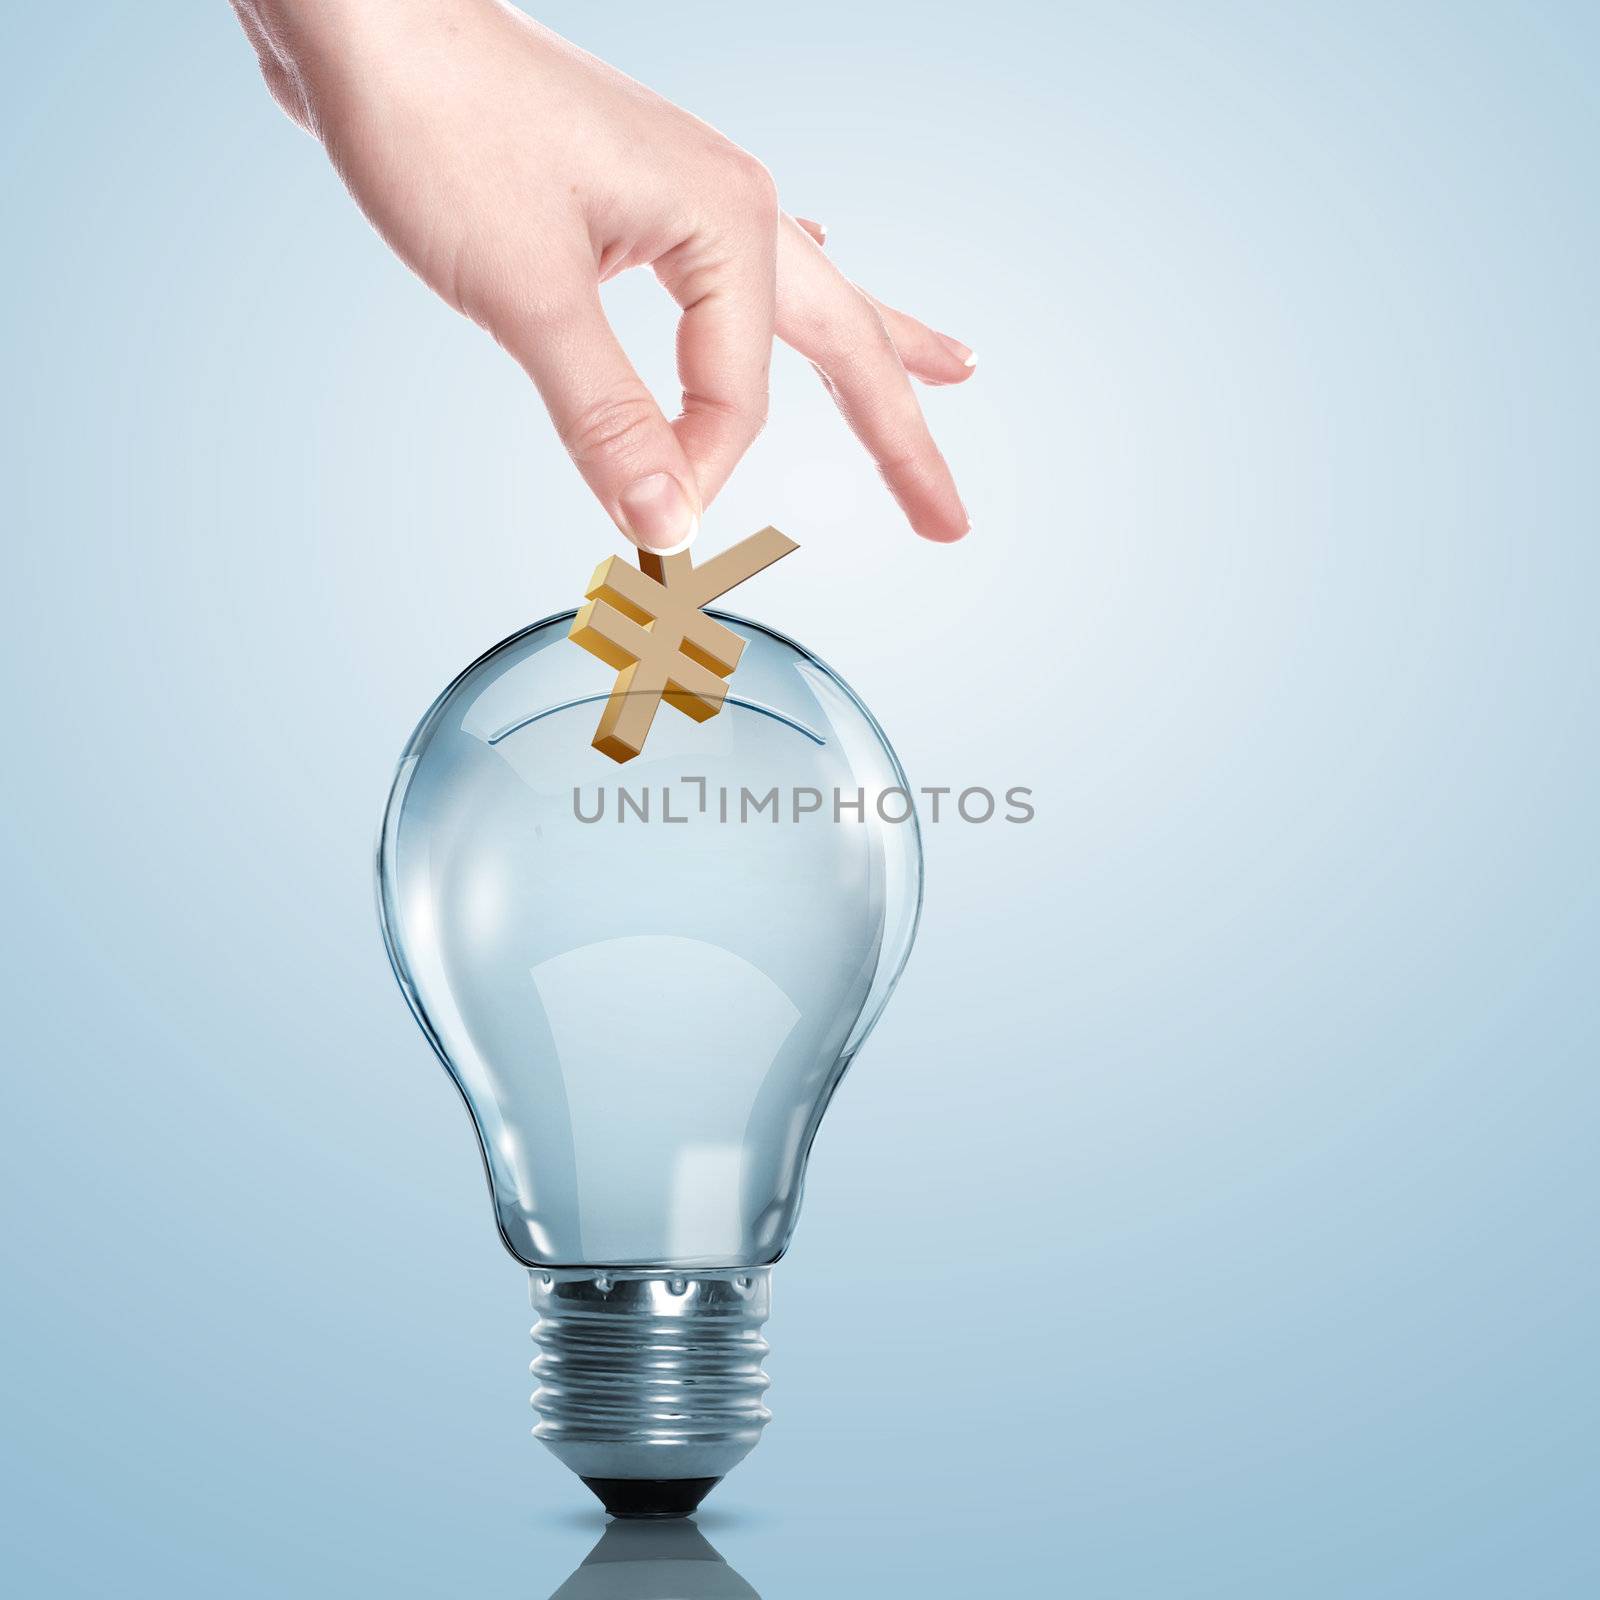 Hand and money inside an electric light bulb